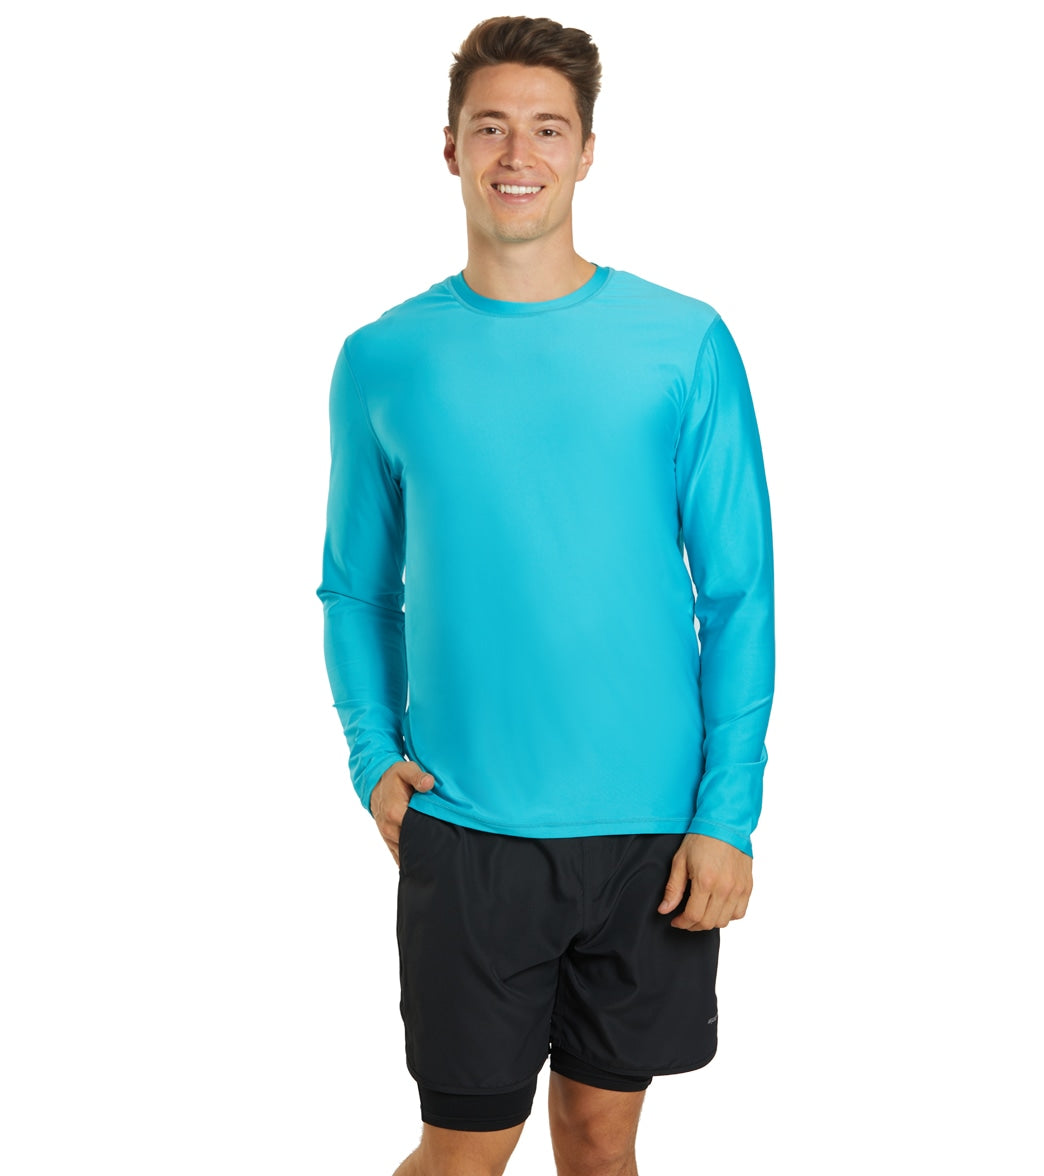 This No. 1 bestselling cooling shirt with UPF 50 sun protection is more  than 50% off at